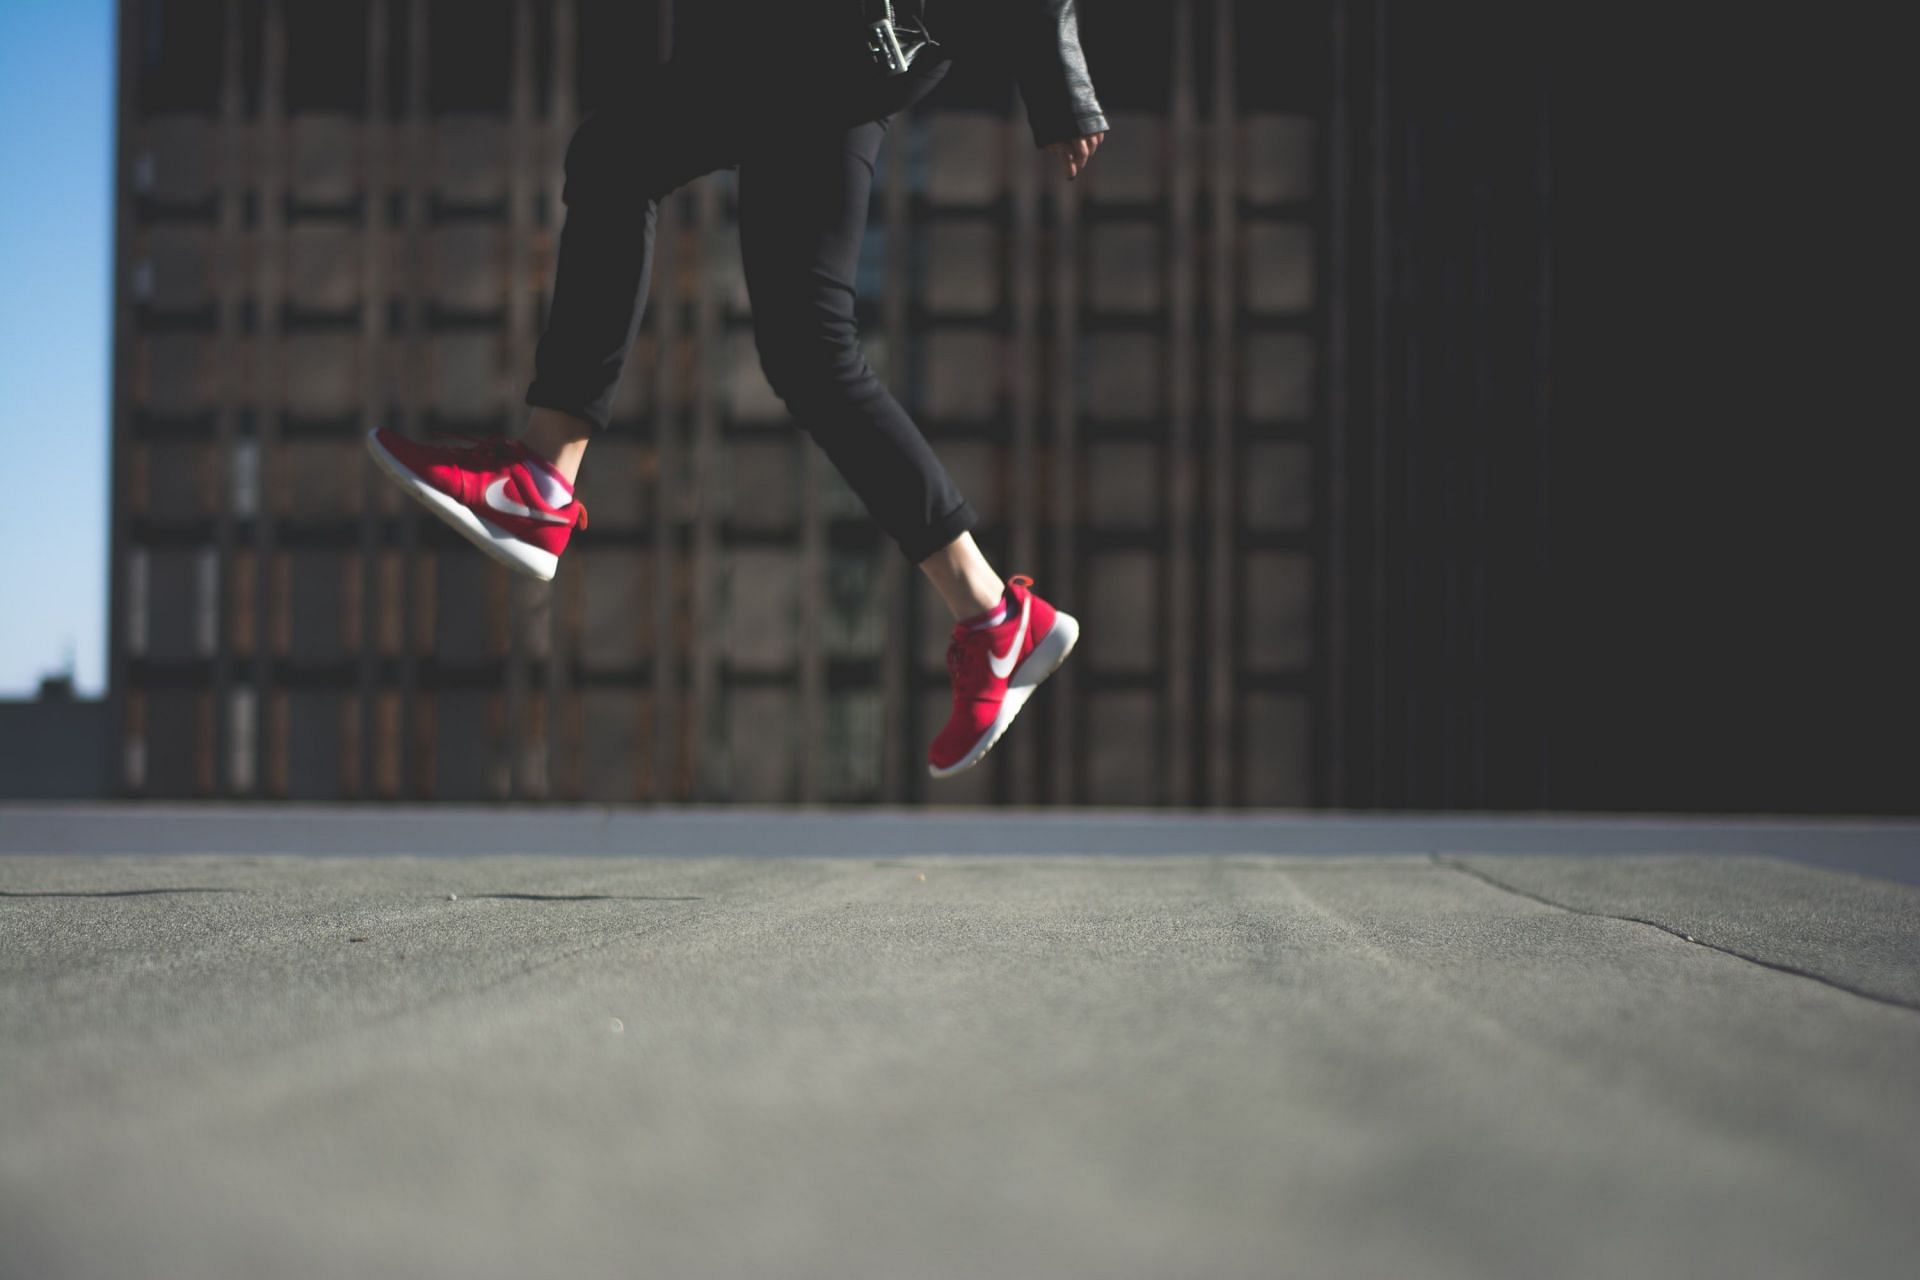 Jumping jacks are one of the most effective exercise to burn calories. (Image via Unsplash / Redd)